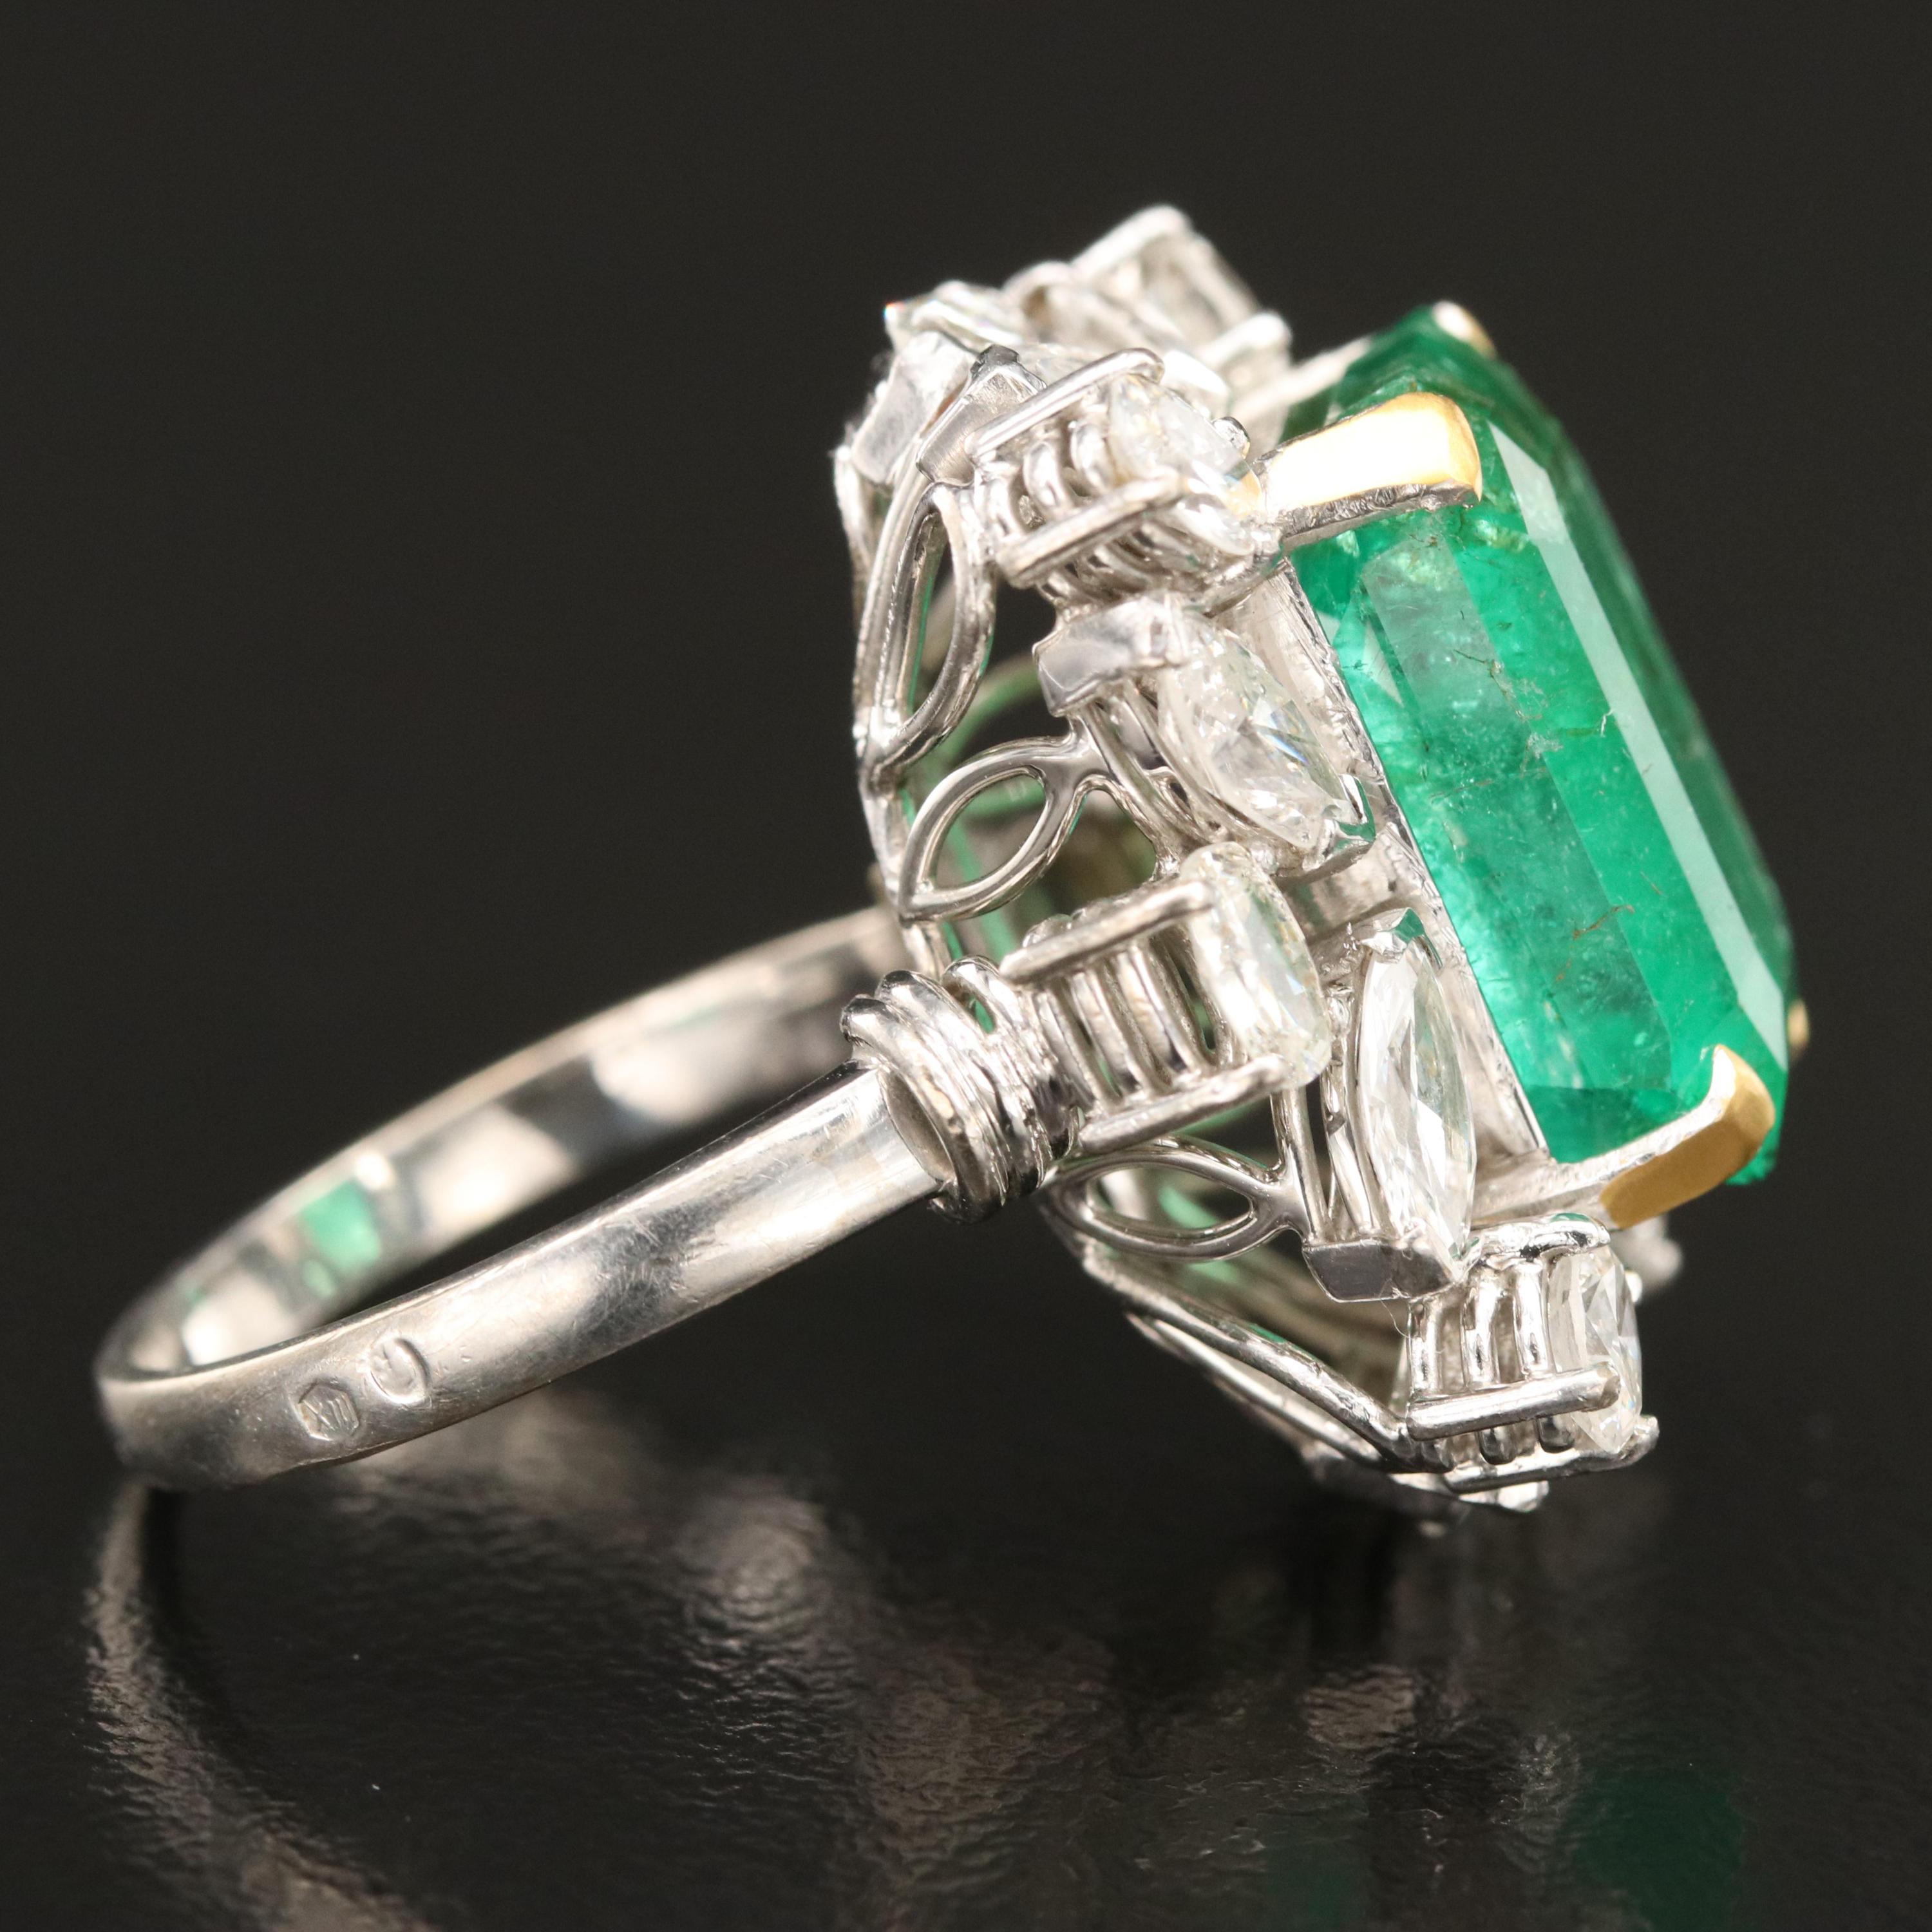 18K Gold 5 CT Natural Emerald and Diamond Antique Art Deco Style Engagement Ring

A stunning ring featuring IGI/GIA Certified 5 Carat Natural Emerald and 0.45 Carat of Diamond Accents set in 18K Solid Gold.

Emeralds are highly valued for their